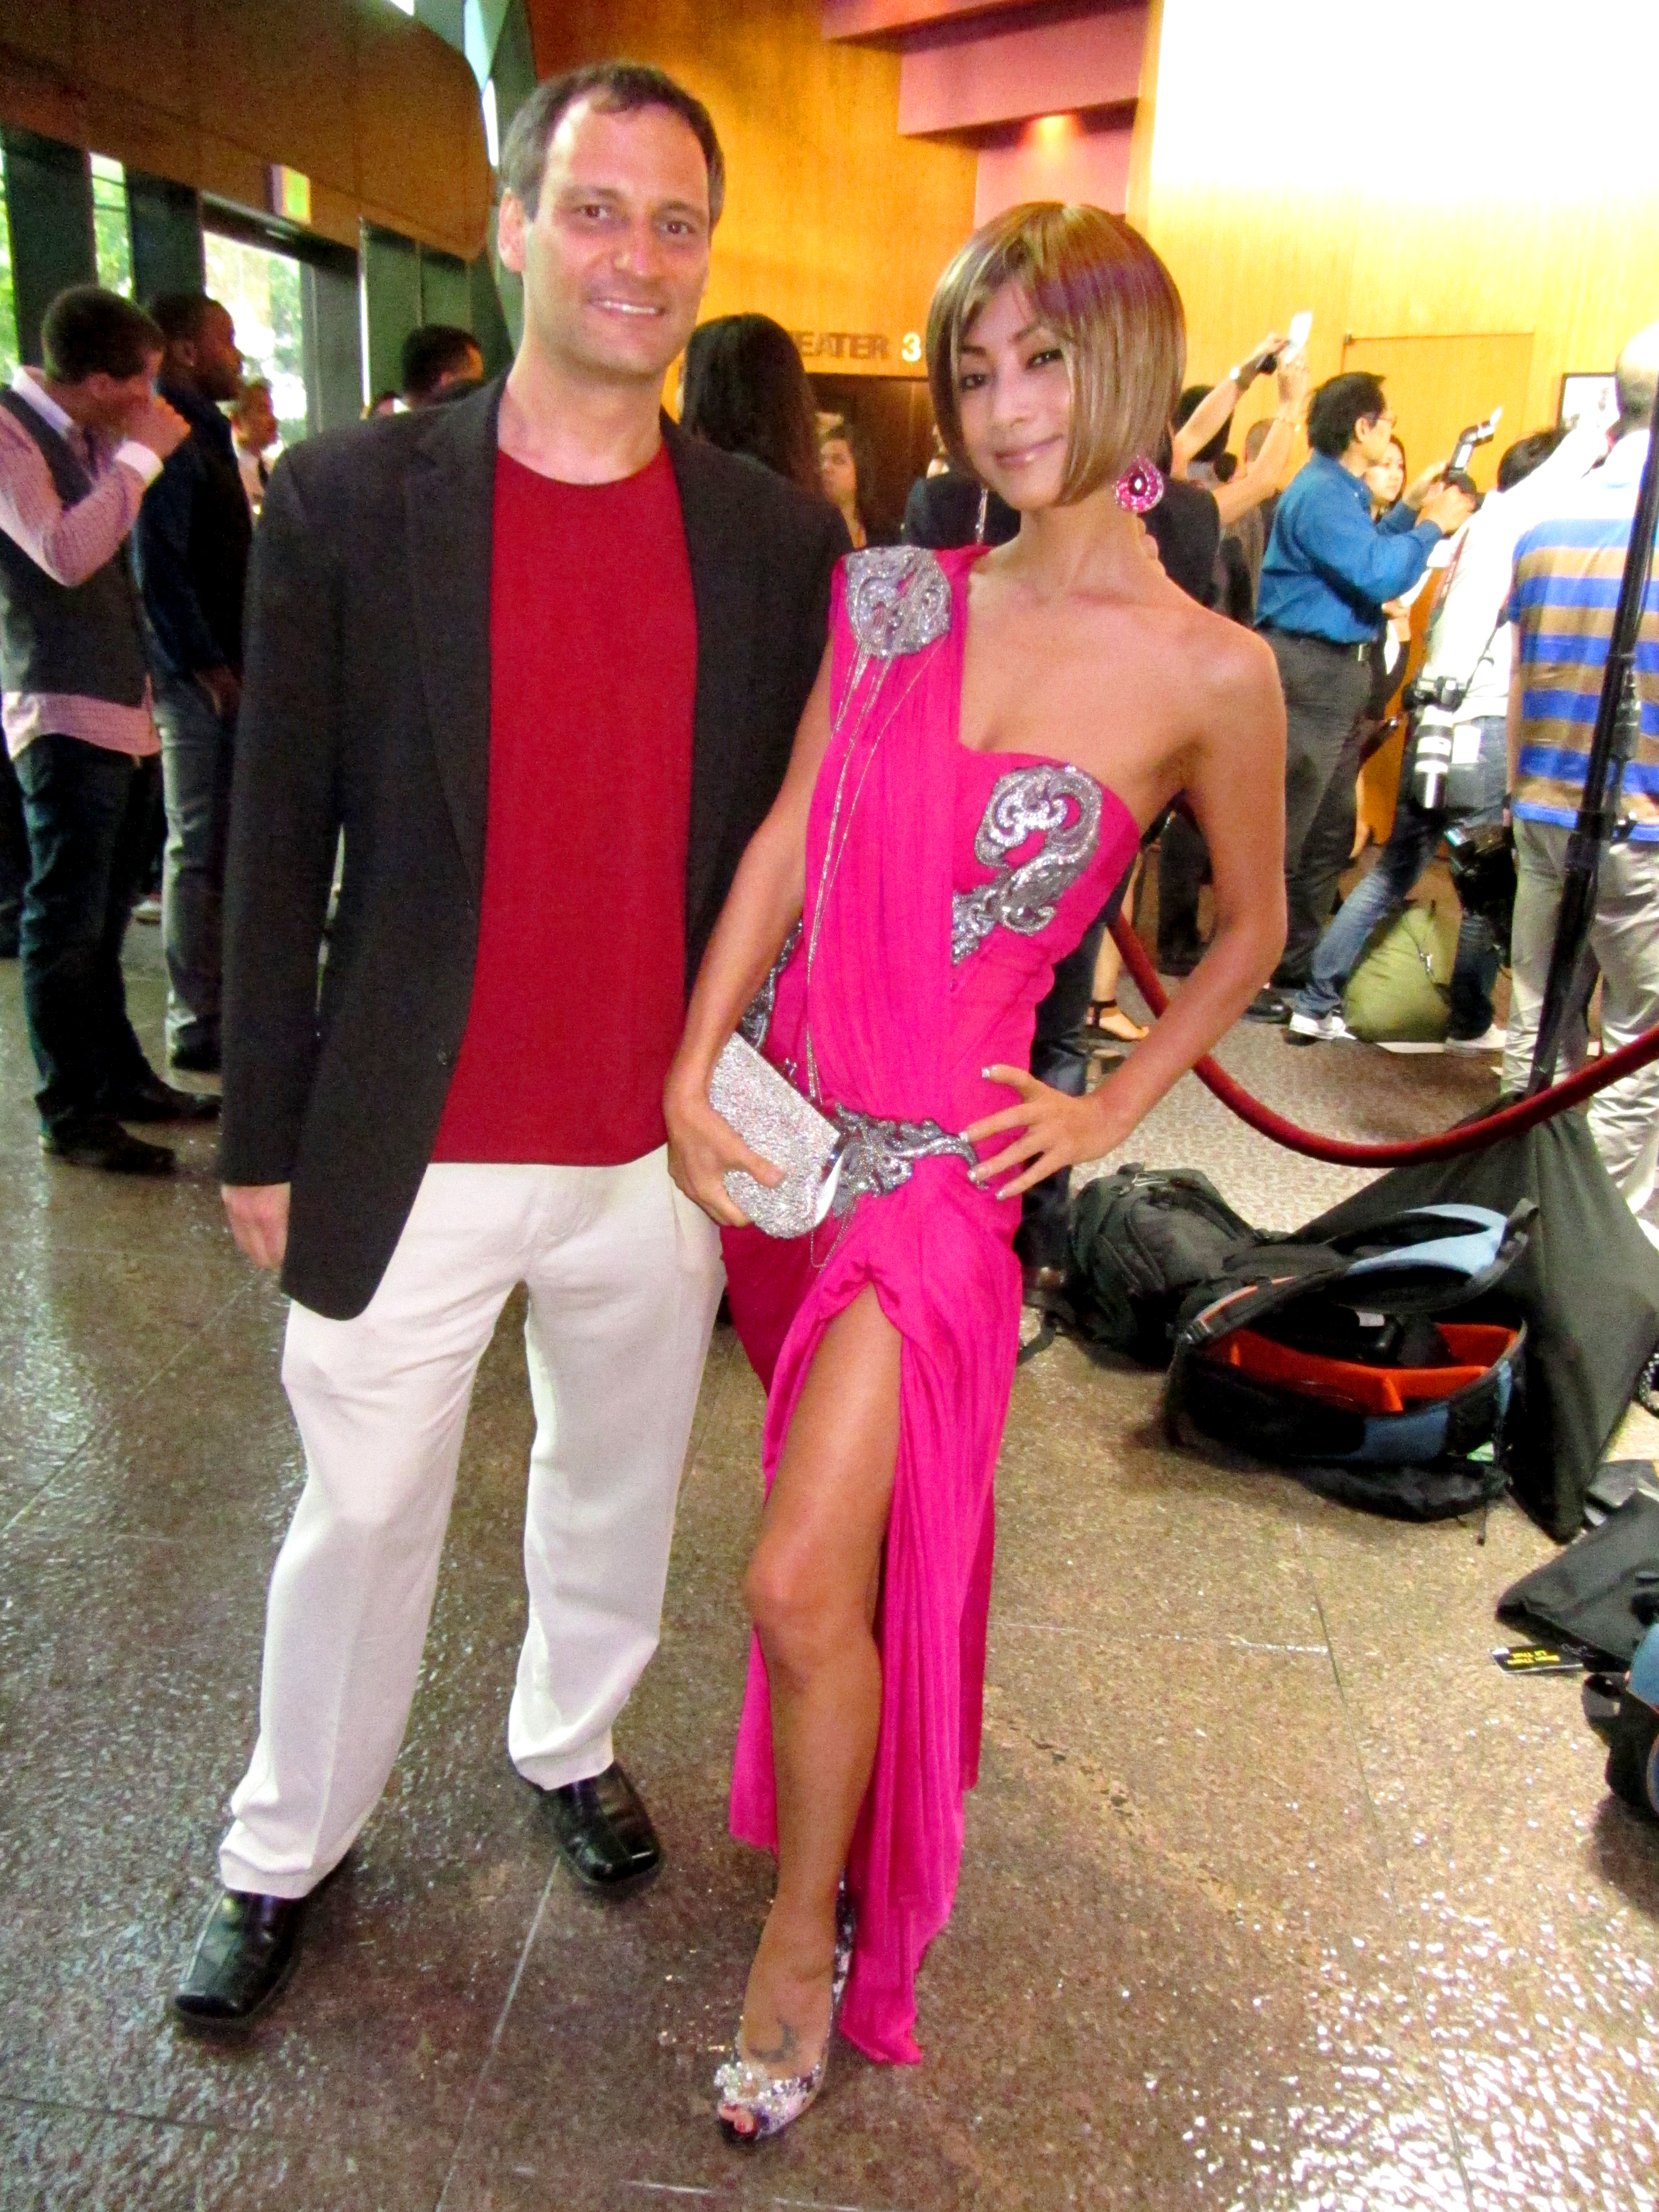 Jeff Gund and Bai Ling at the Asian Pacific Film Festival